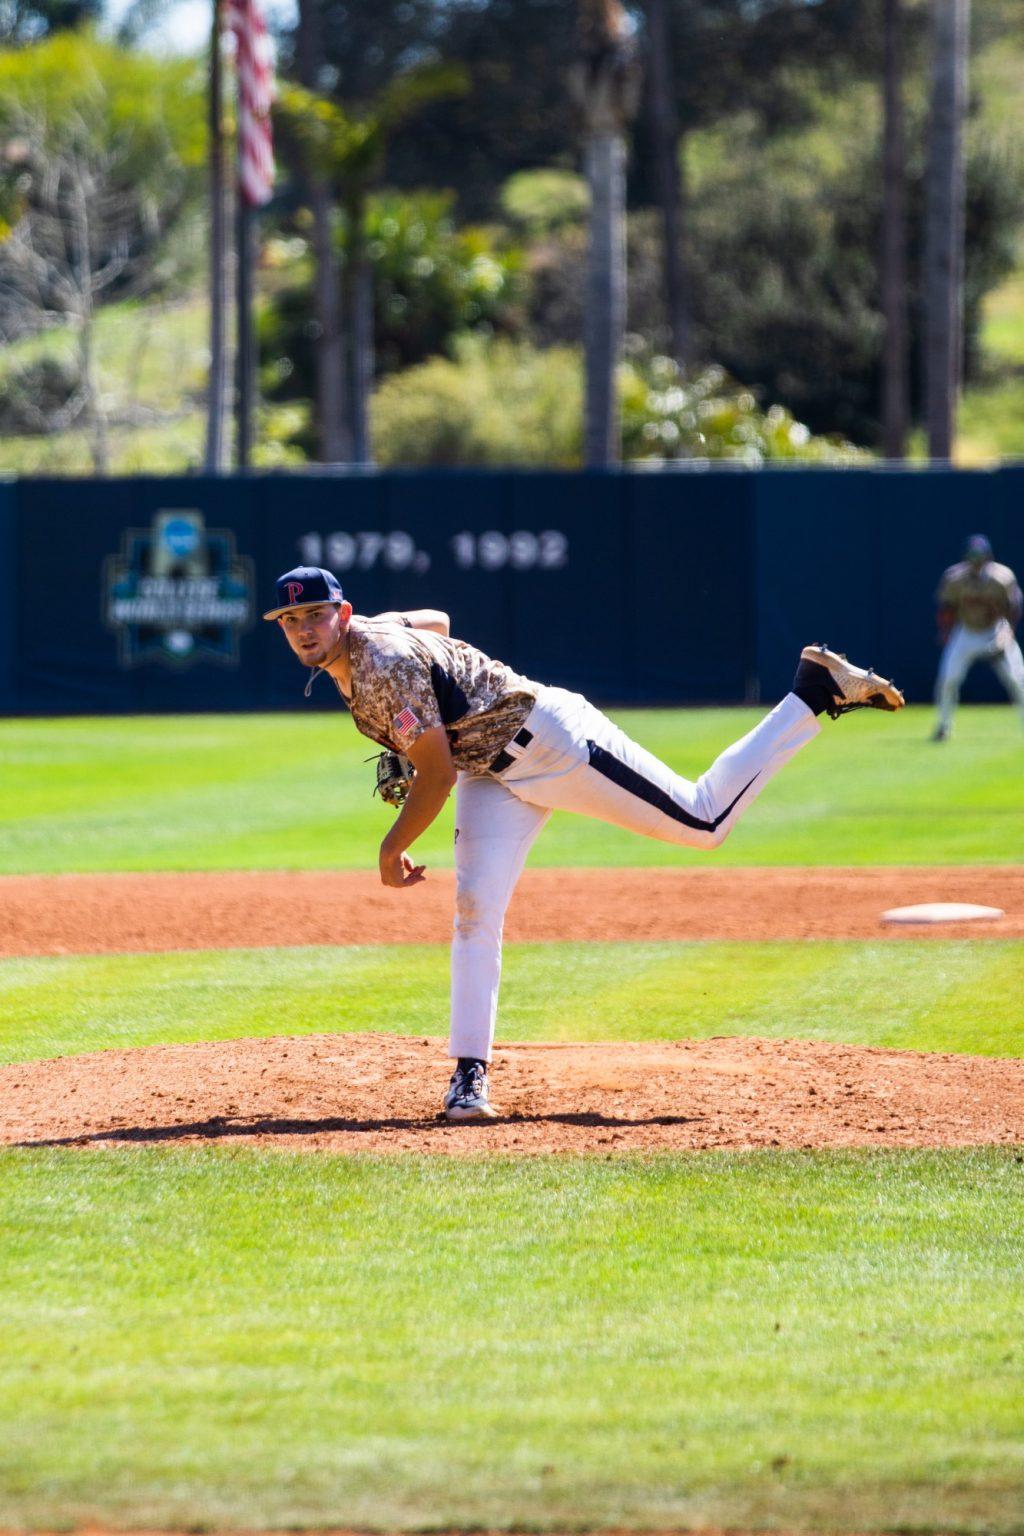 Sophomore left-hander Nathan Diamond completes his follow through Saturday afternoon at Eddy D. Field Stadium in Malibu. After four scoreless innings in a 7-2 Waves win, Diamond holds an even 3.00 earned run average on the season.